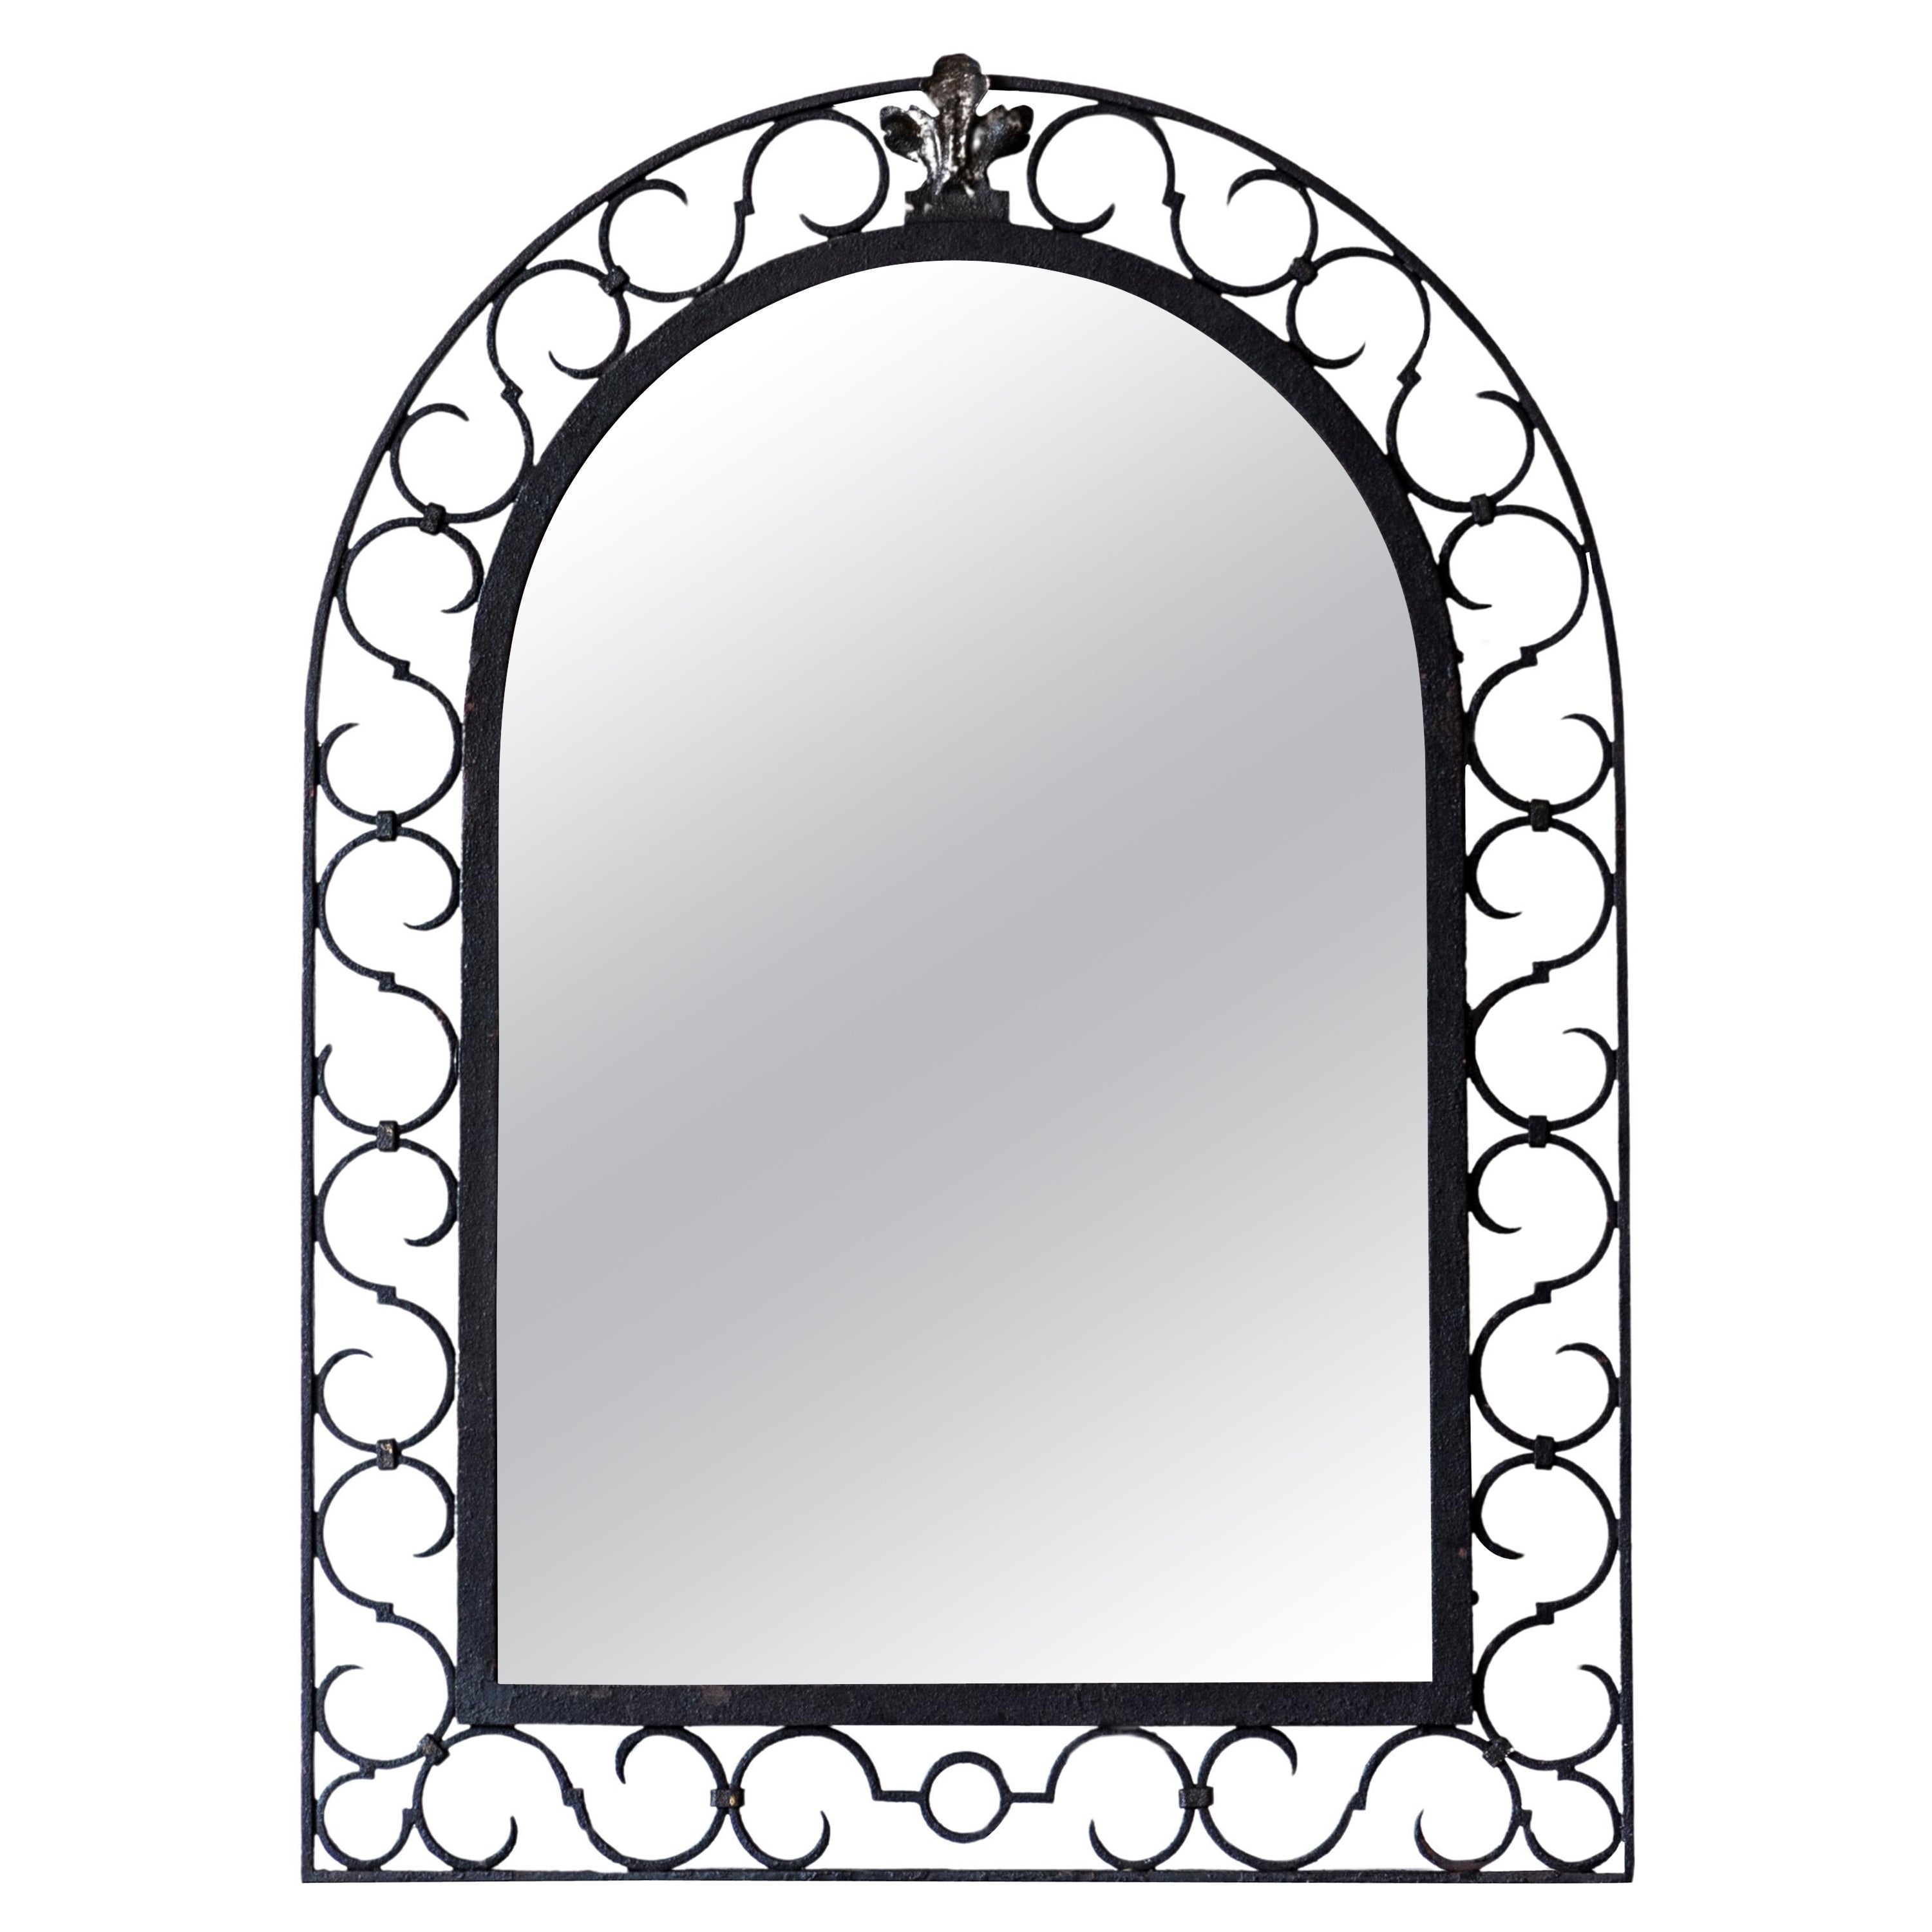 French Iron Arching Mirror with Openwork S-Scroll Motifs and Foliage Crest